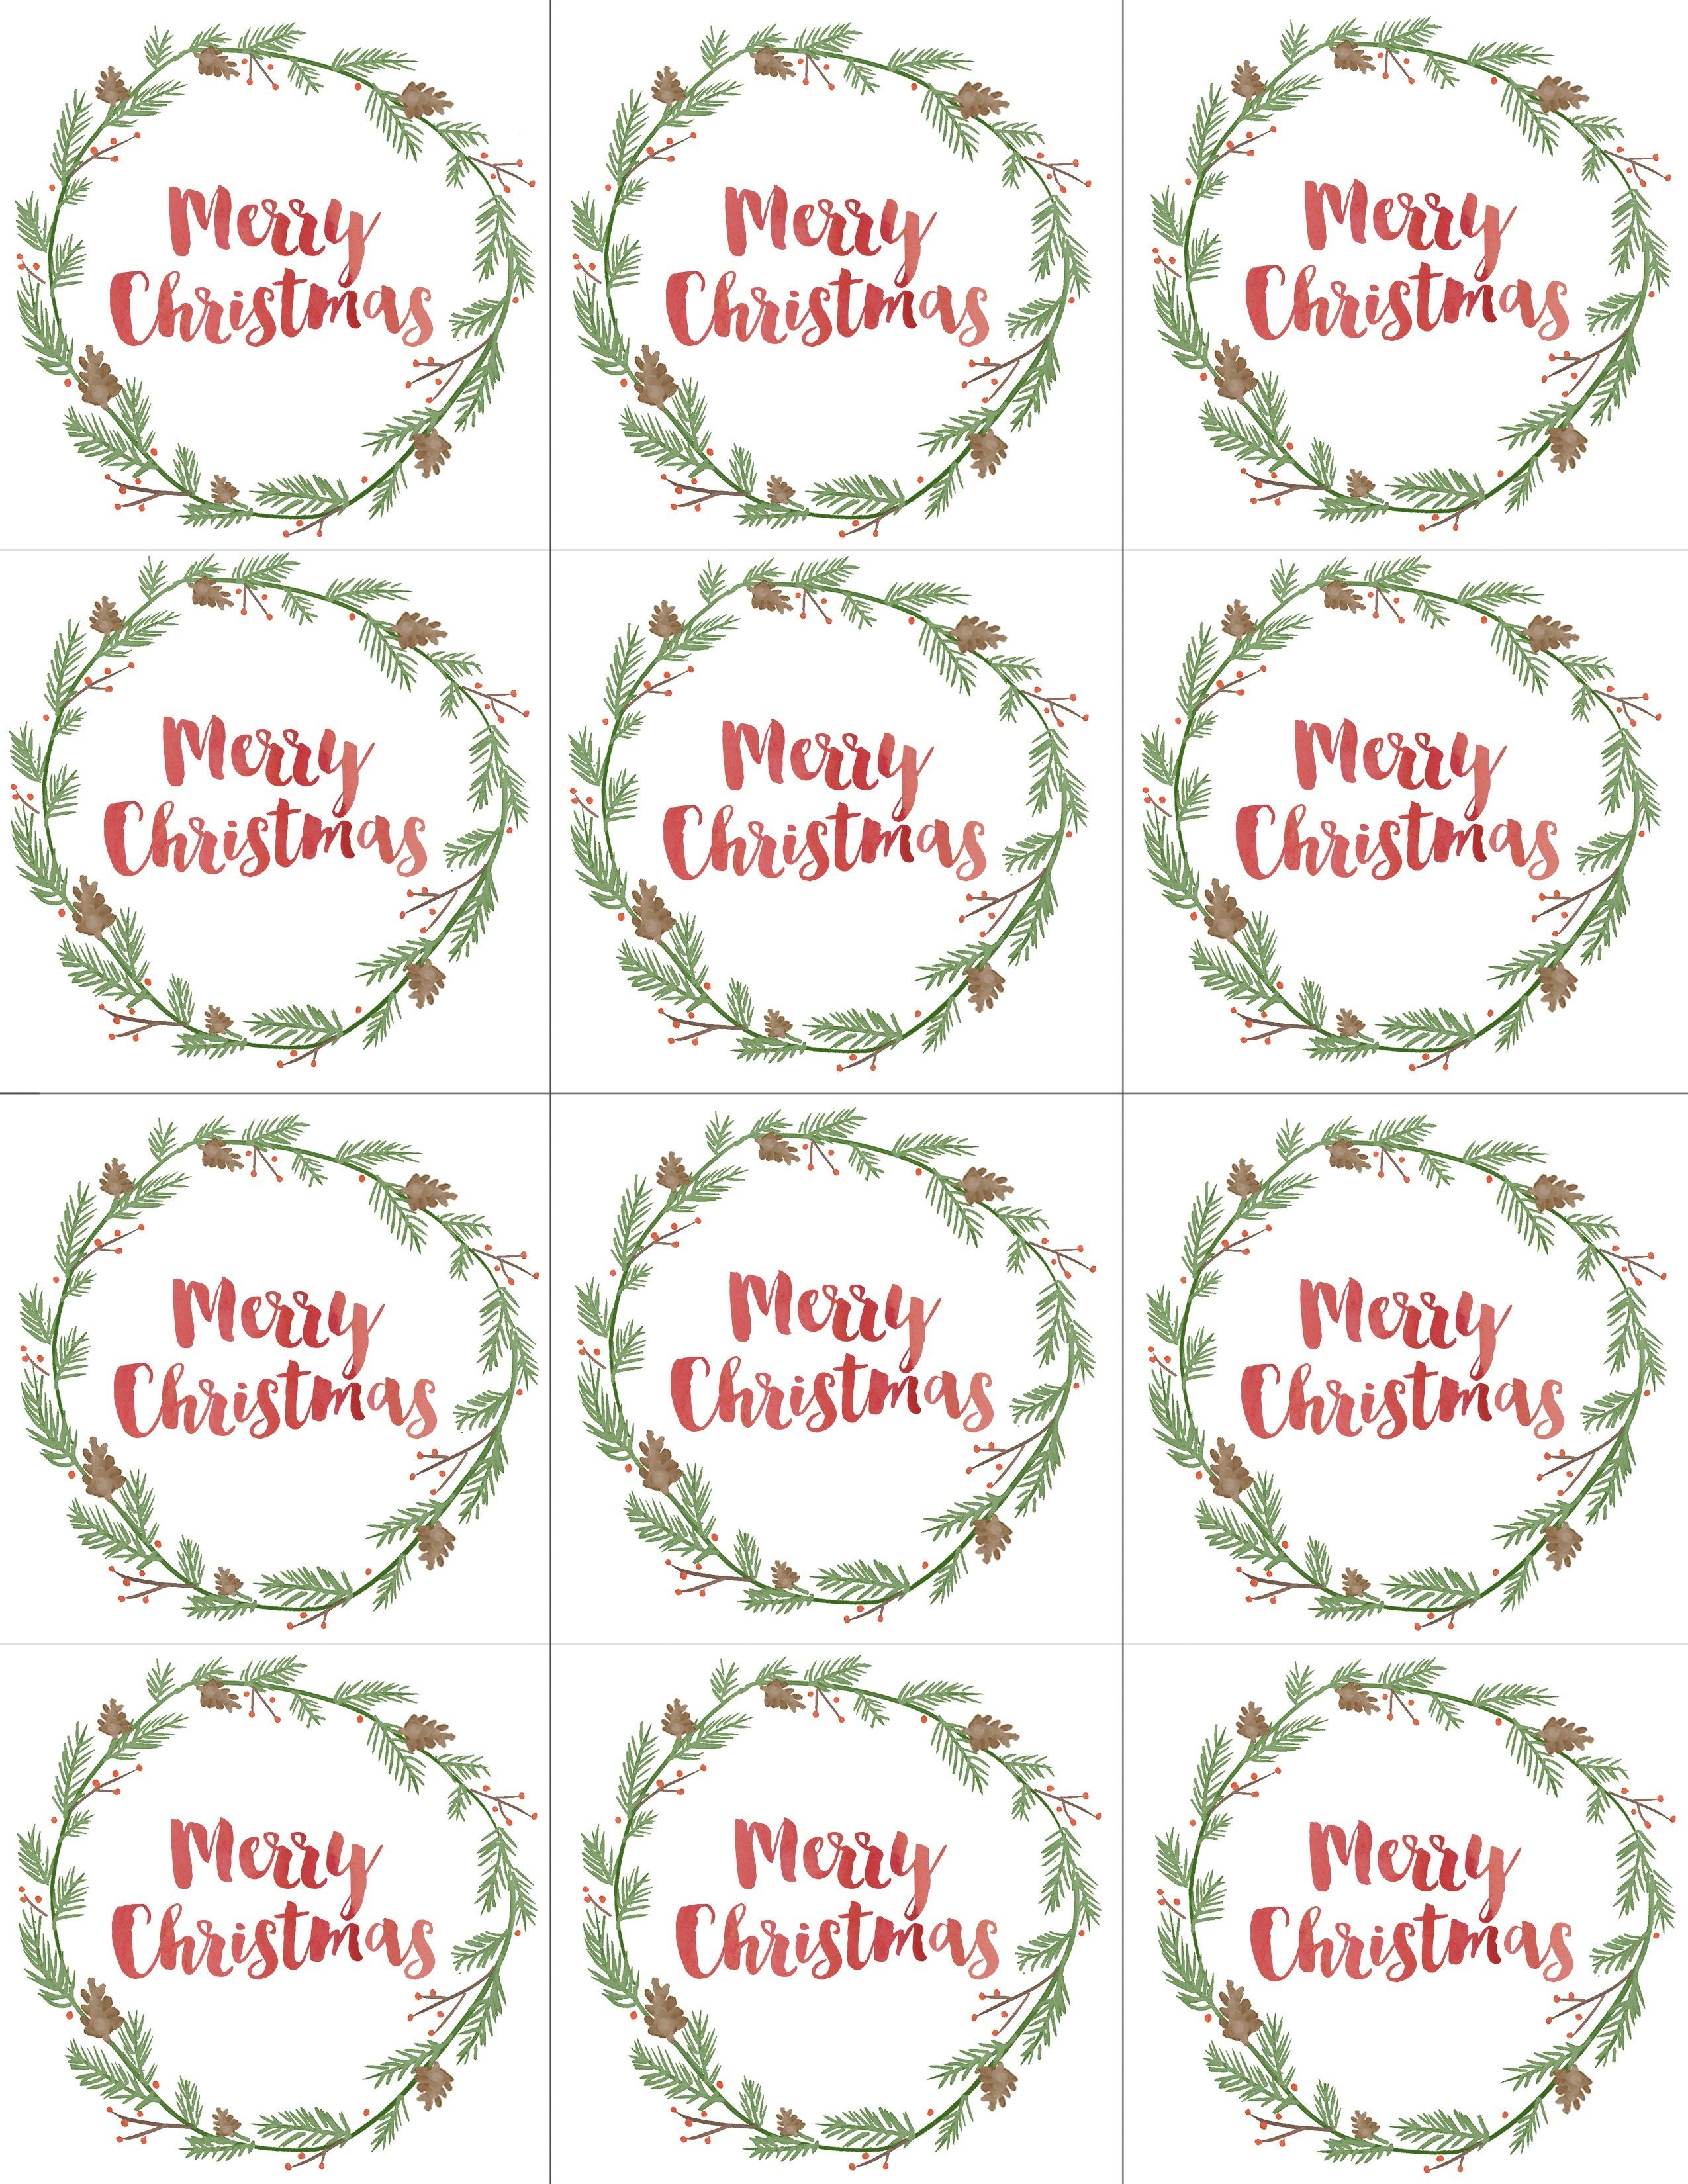 Hand Painted Gift Tags Free Printable | Christmas | Christmas Gift - Free Printable Customizable Gift Tags